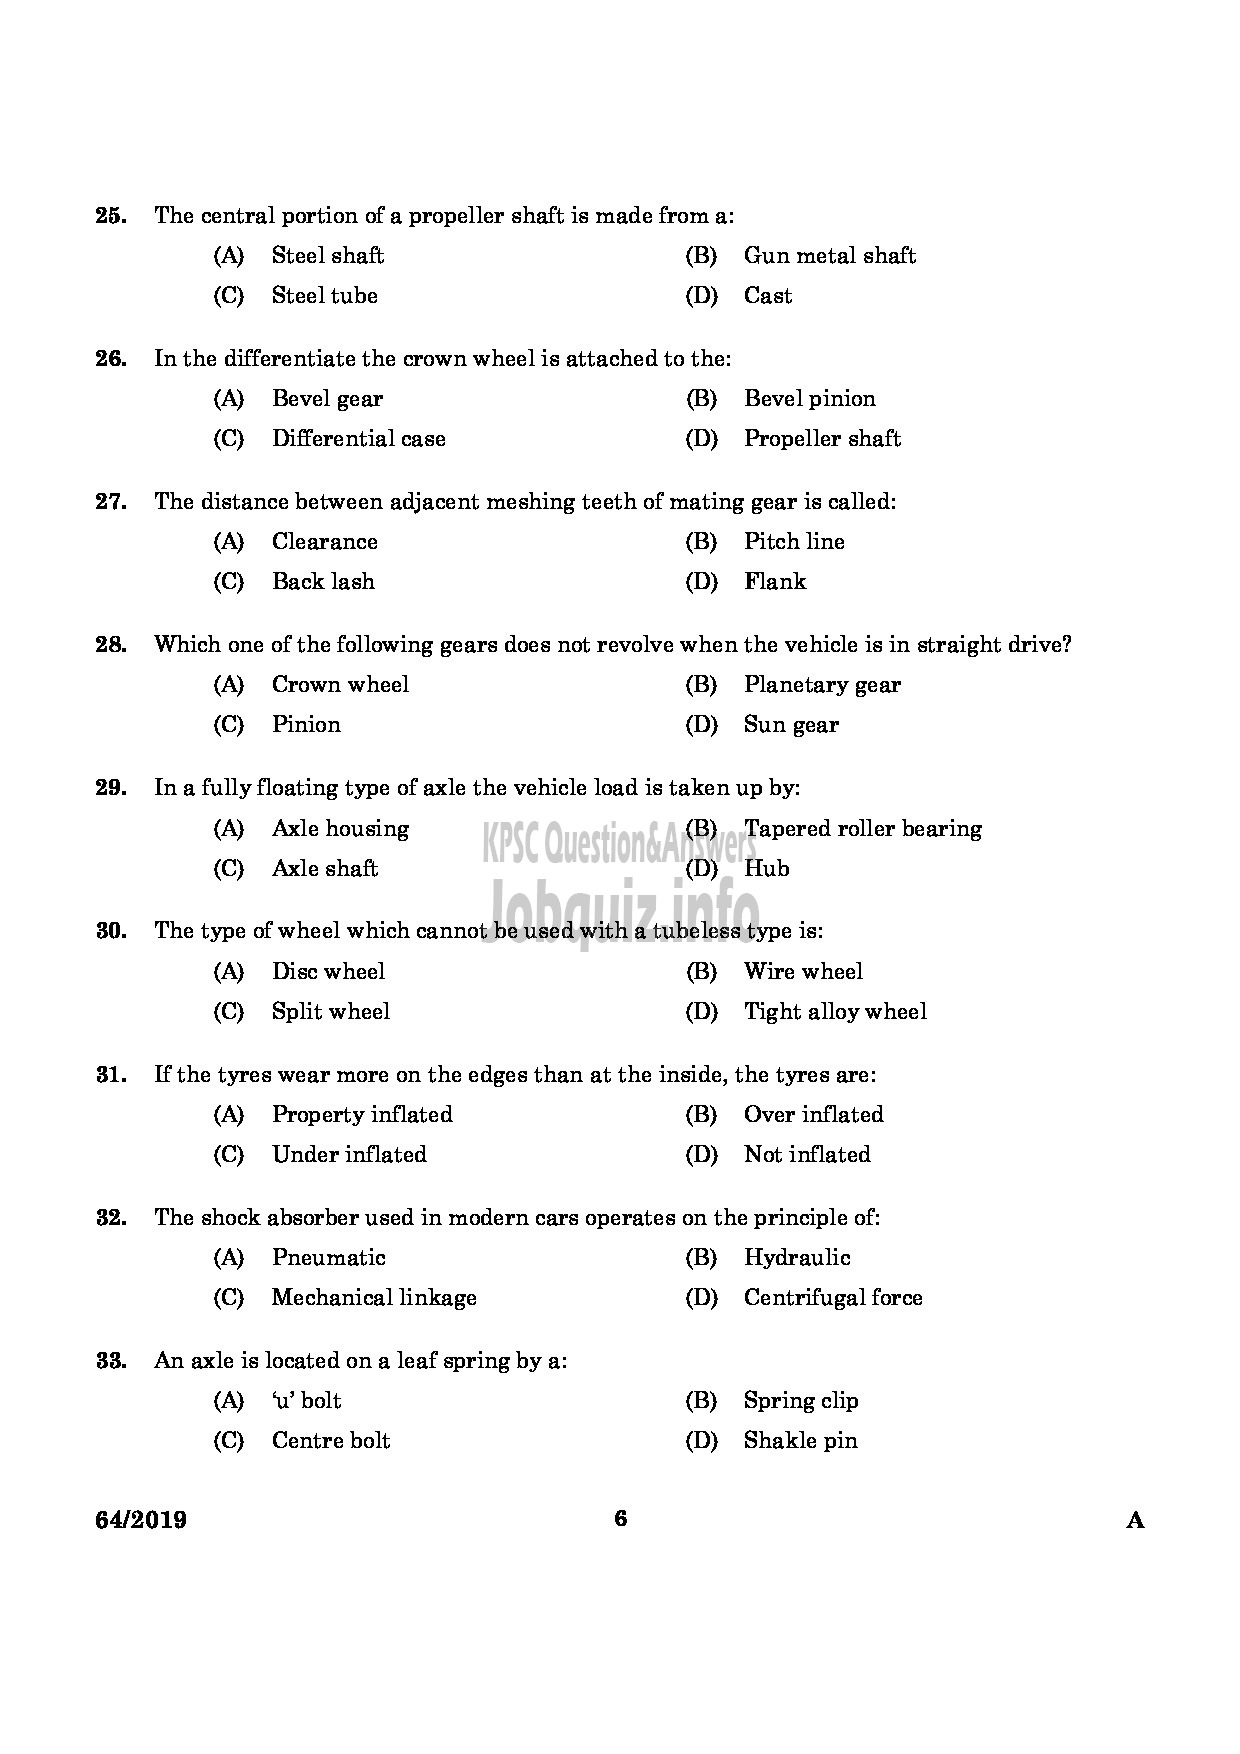 Kerala PSC Question Paper - DRILLING ASSISTANT GROUND WATER DEPARTMENT English -4